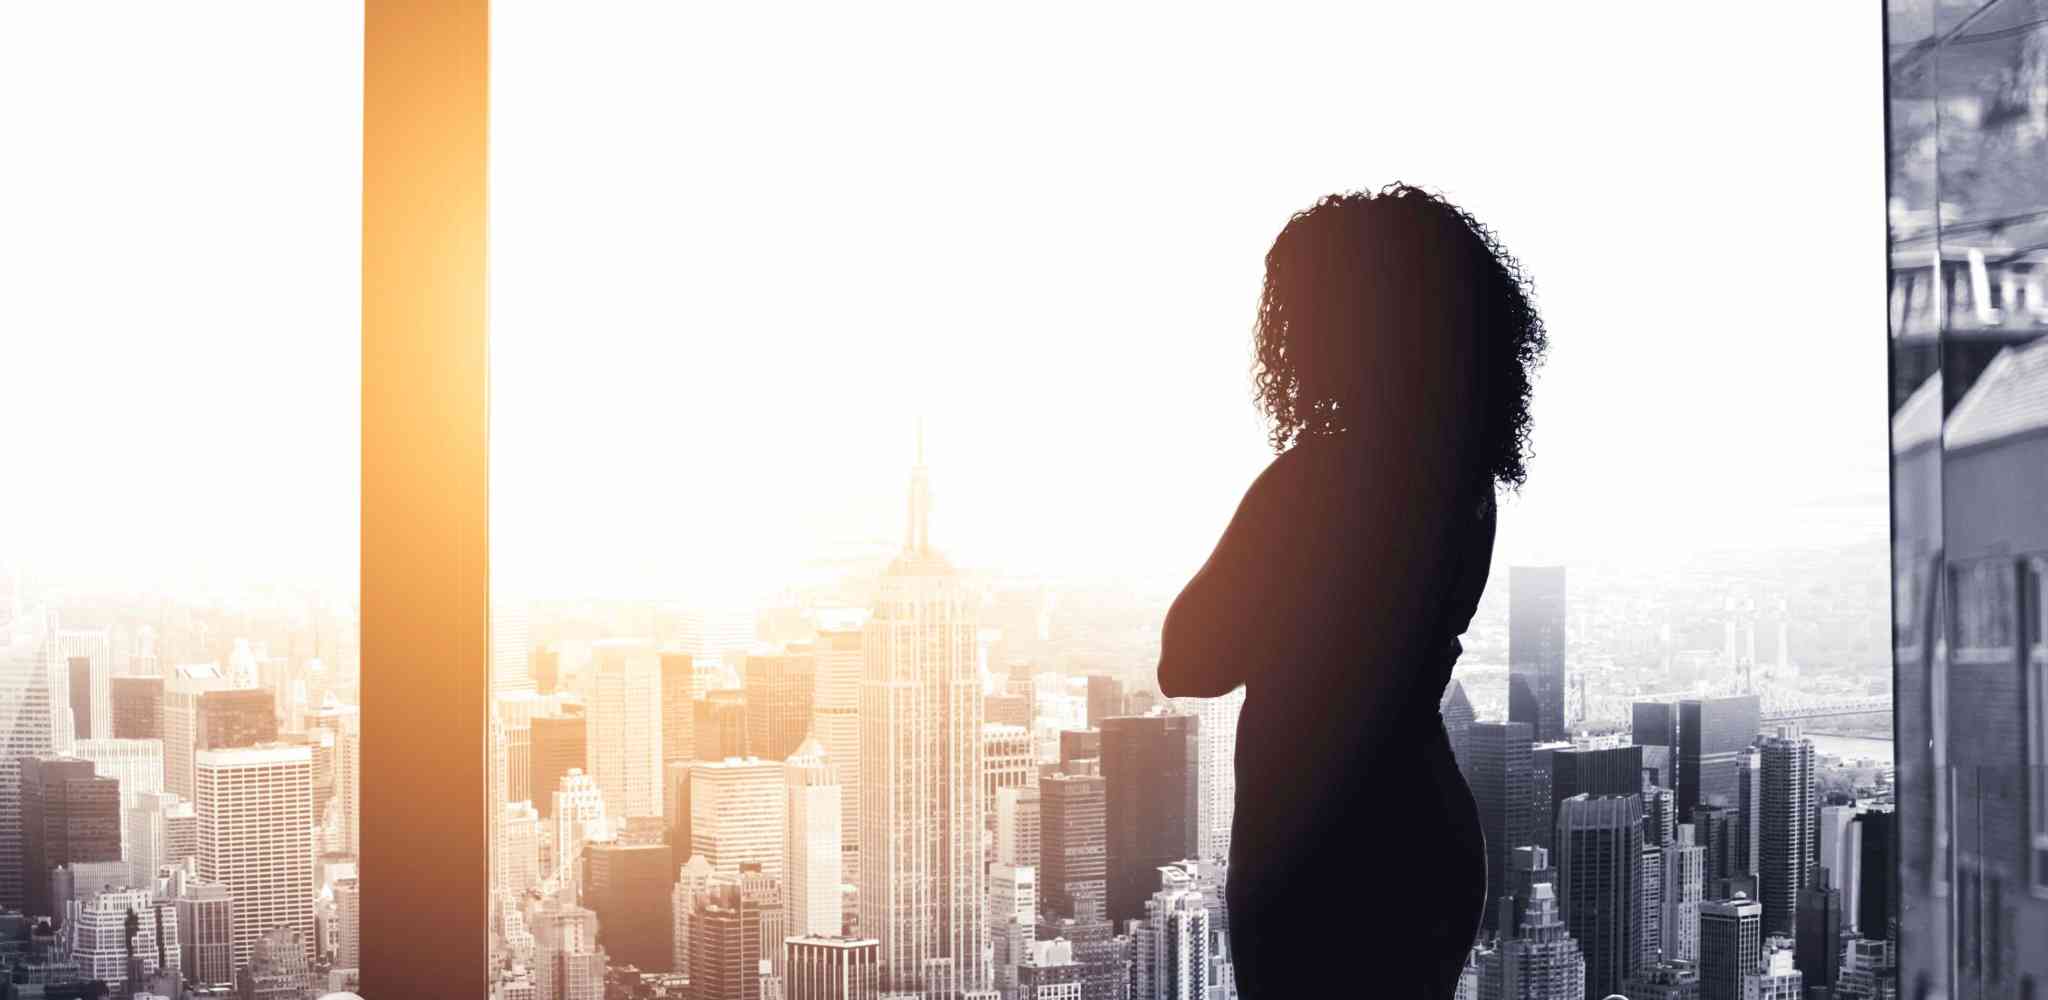 Women in silhouette looking out an upper floor office window at the sun setting over a city skyline.